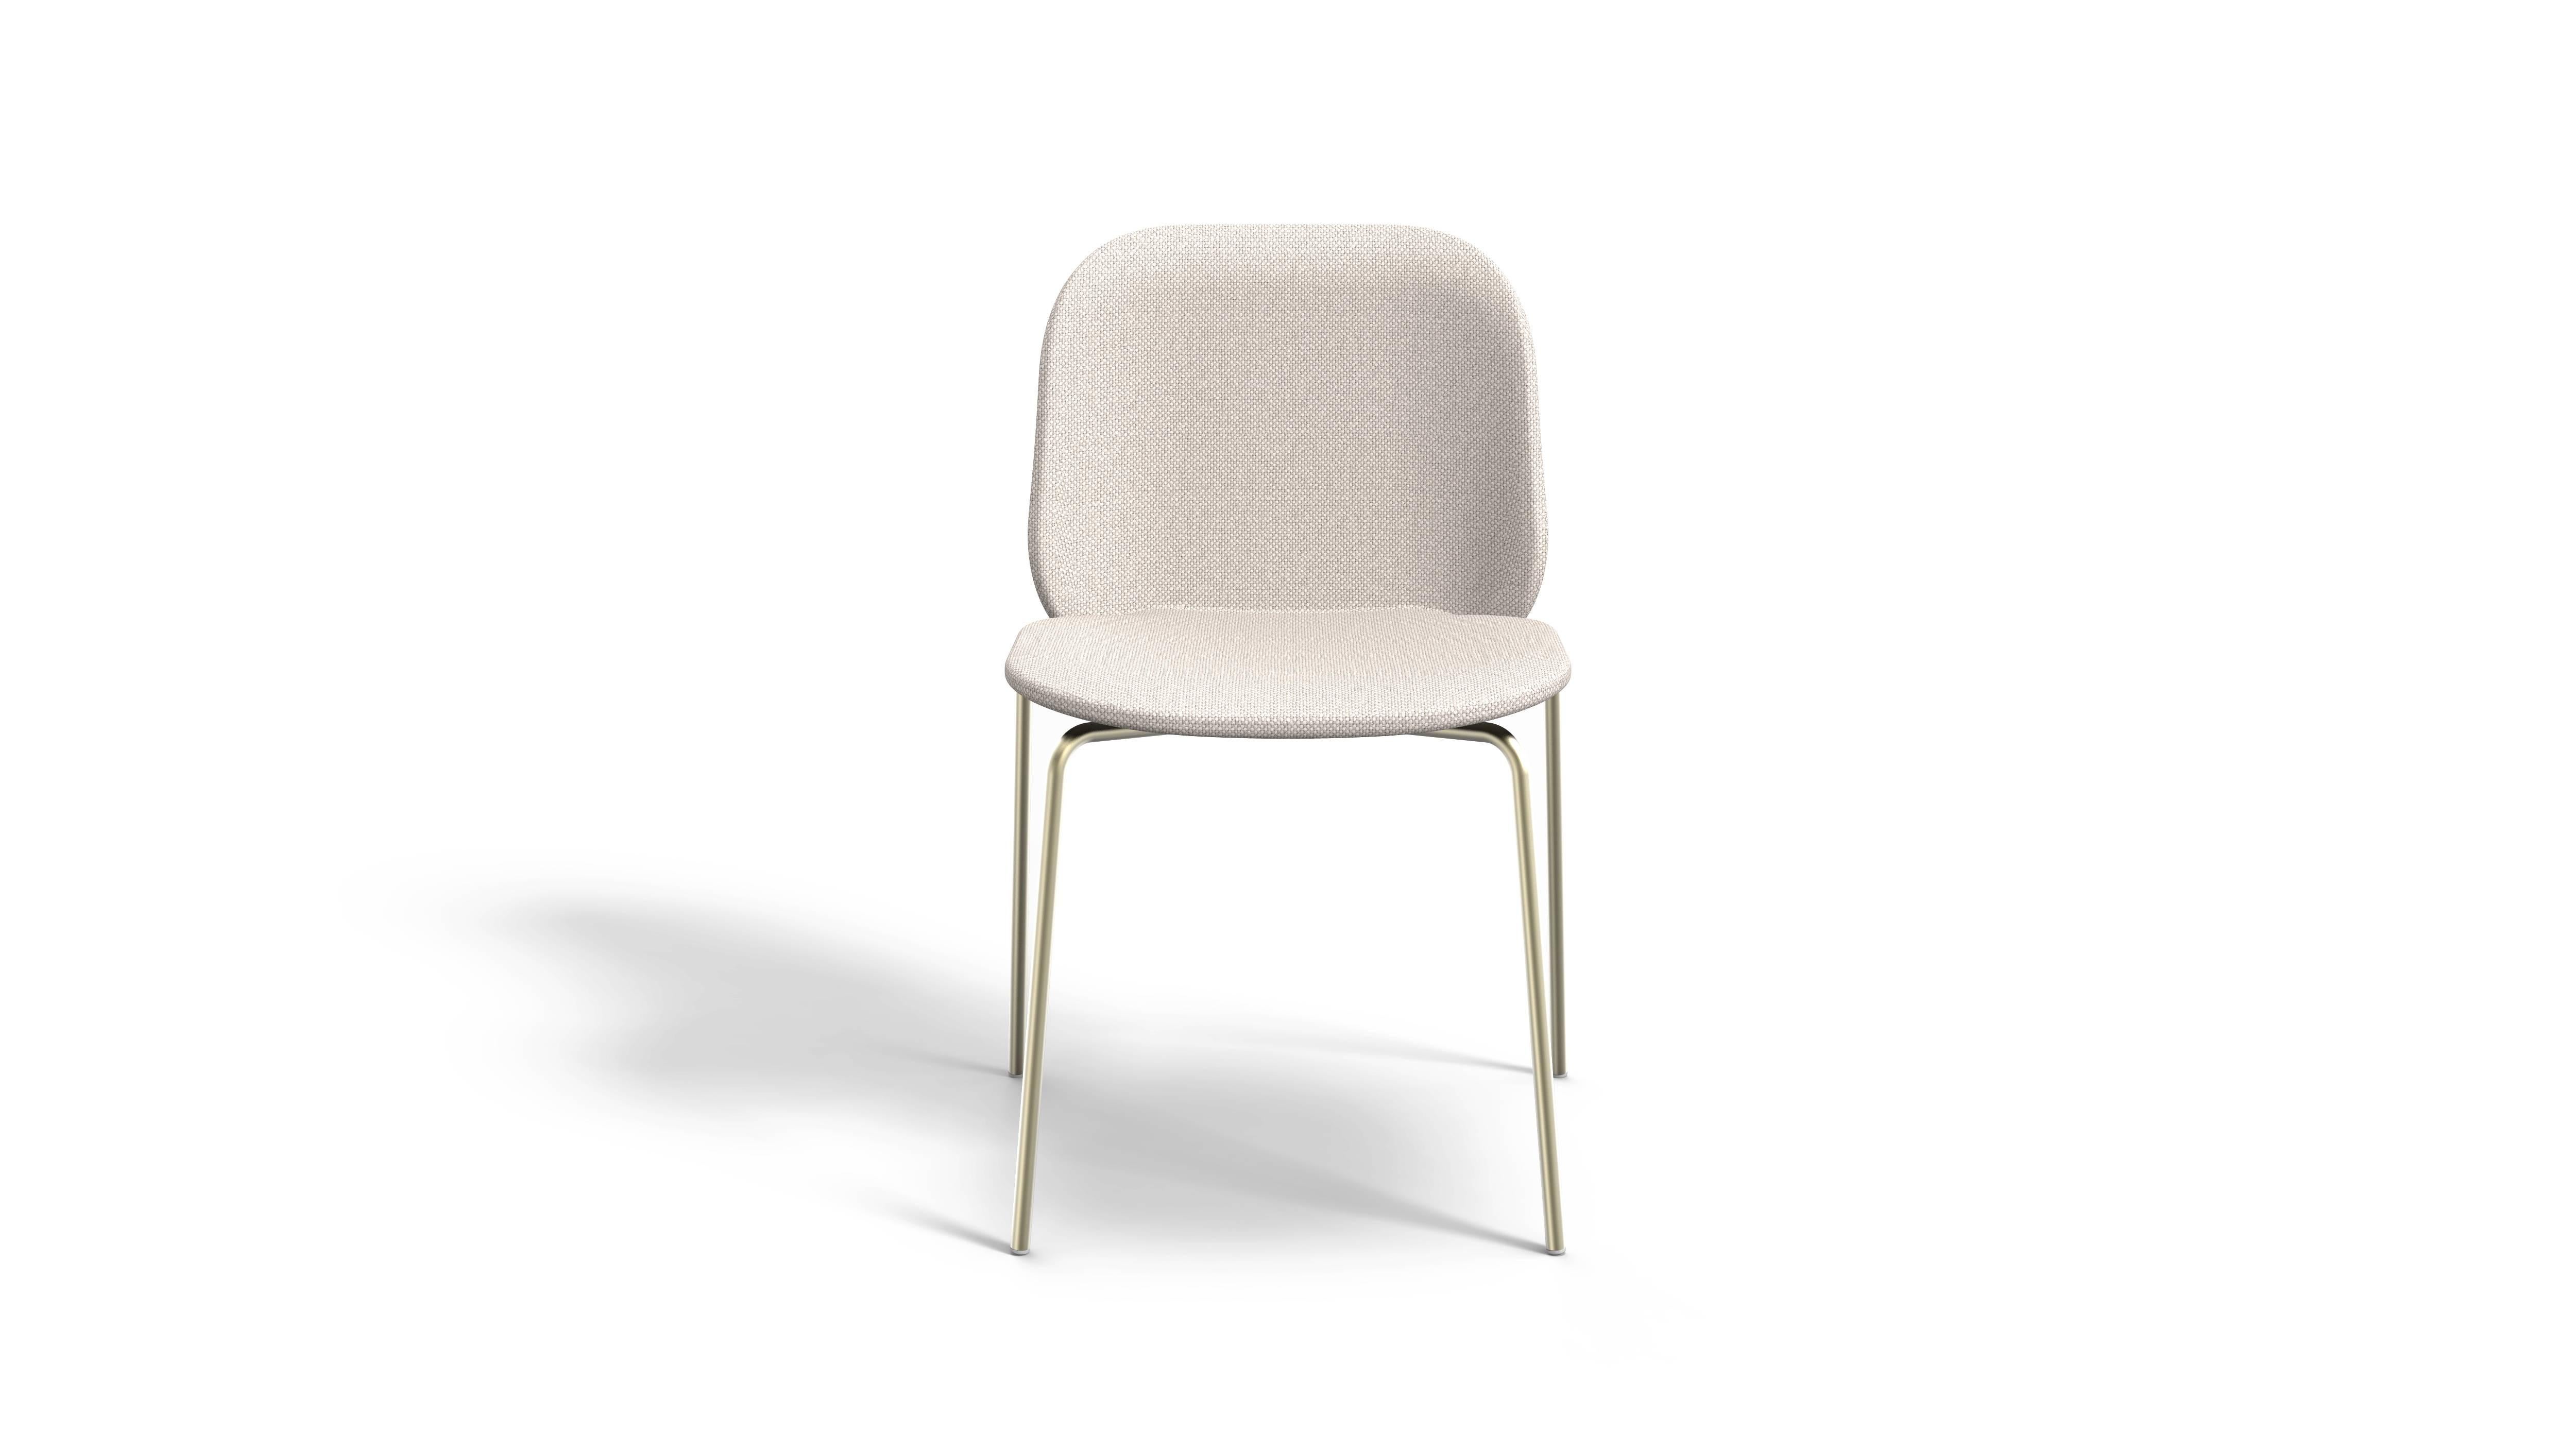 Like a flower, the Corolle chair has a fine and embracing shape. Mario Ruiz designs the Corolle chair, where the volumes are the essence of the contemporary design. The seat and the backrest create a unique body, with dimensions and design very well